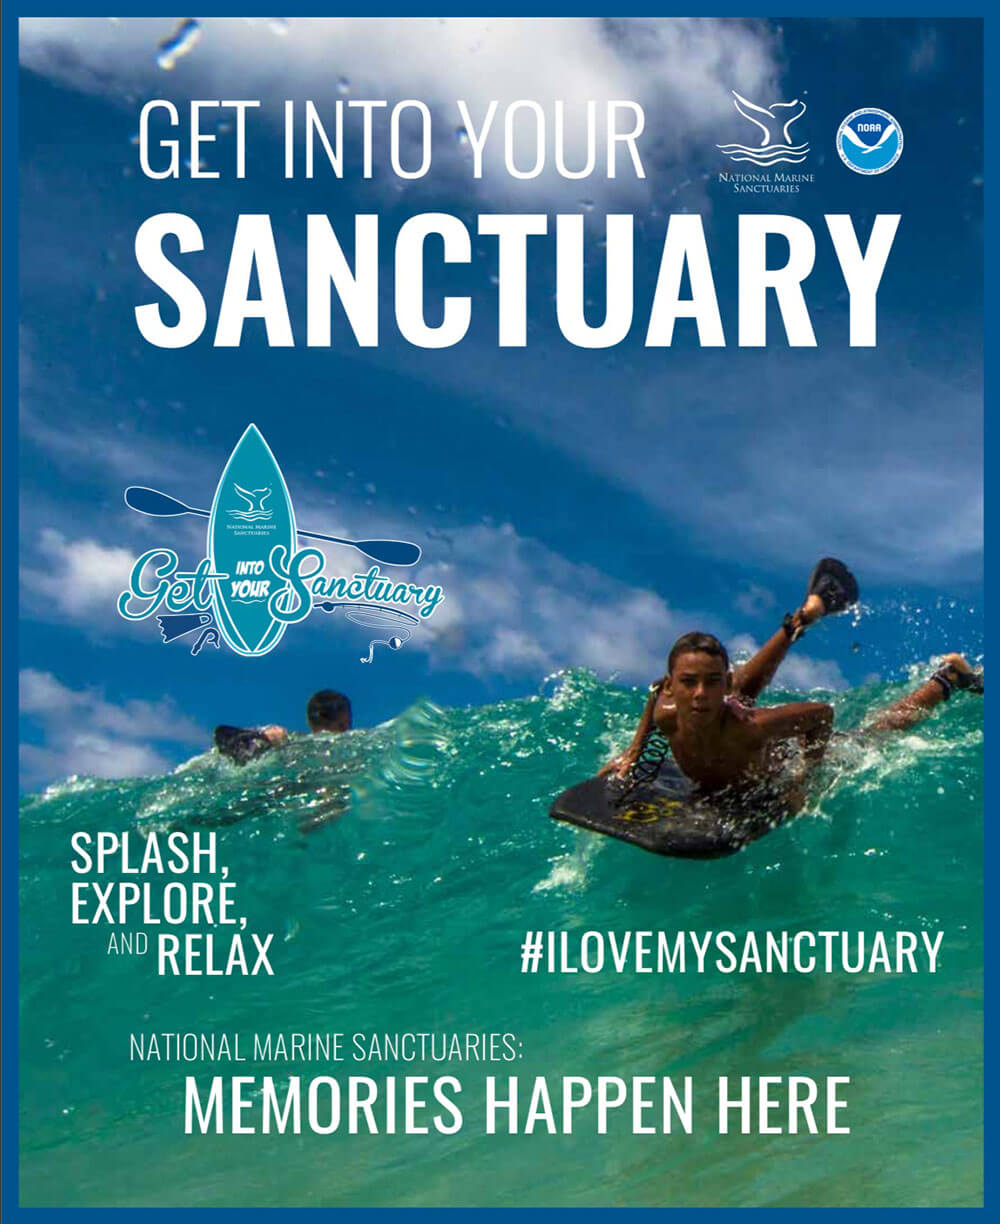 get into your sanctuary magazine - kid surfing